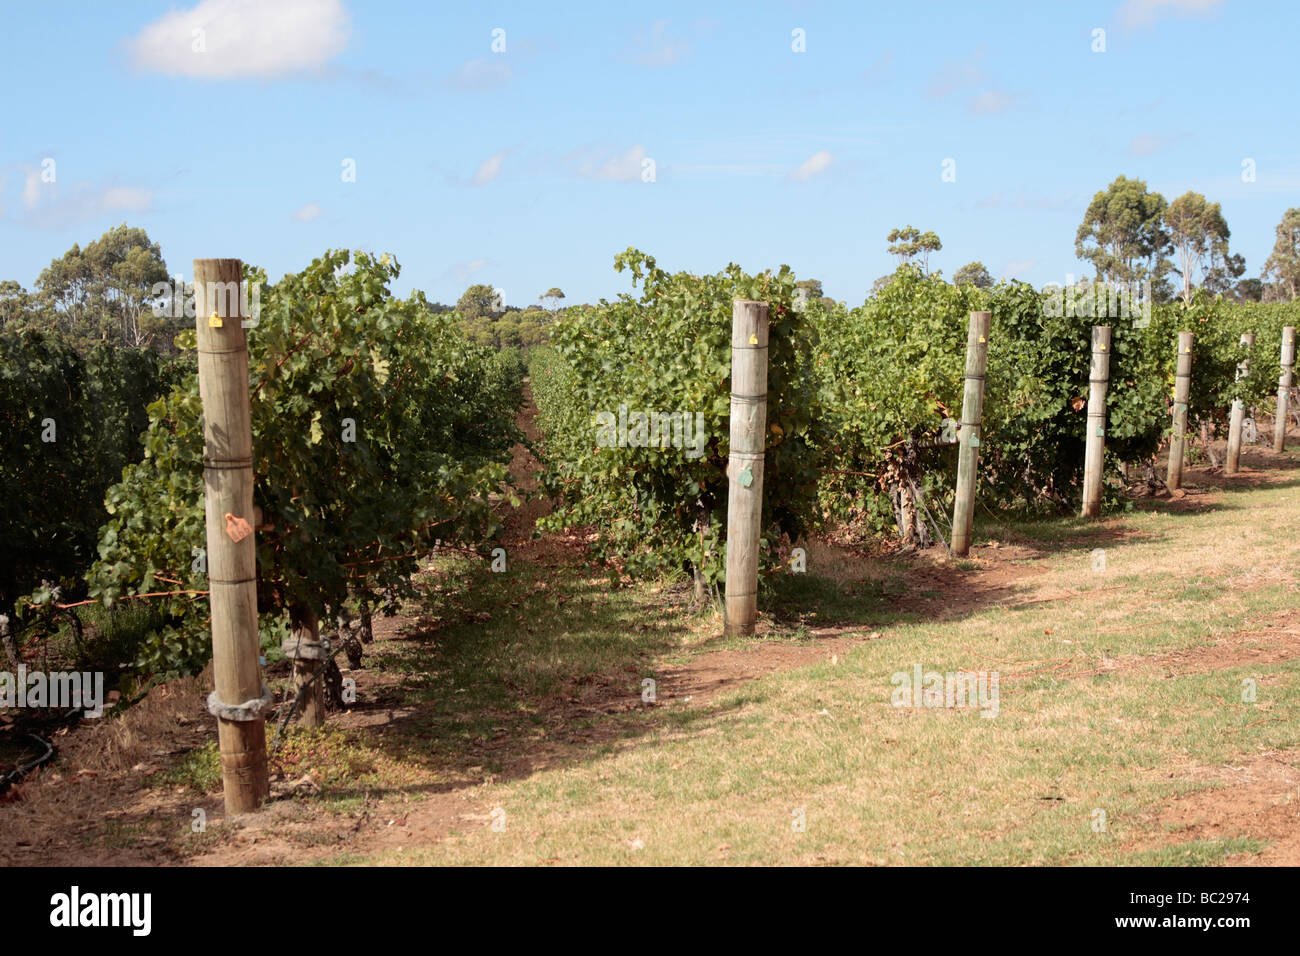 Rows of vines in the Margaret River region of Western Australia Stock Photo